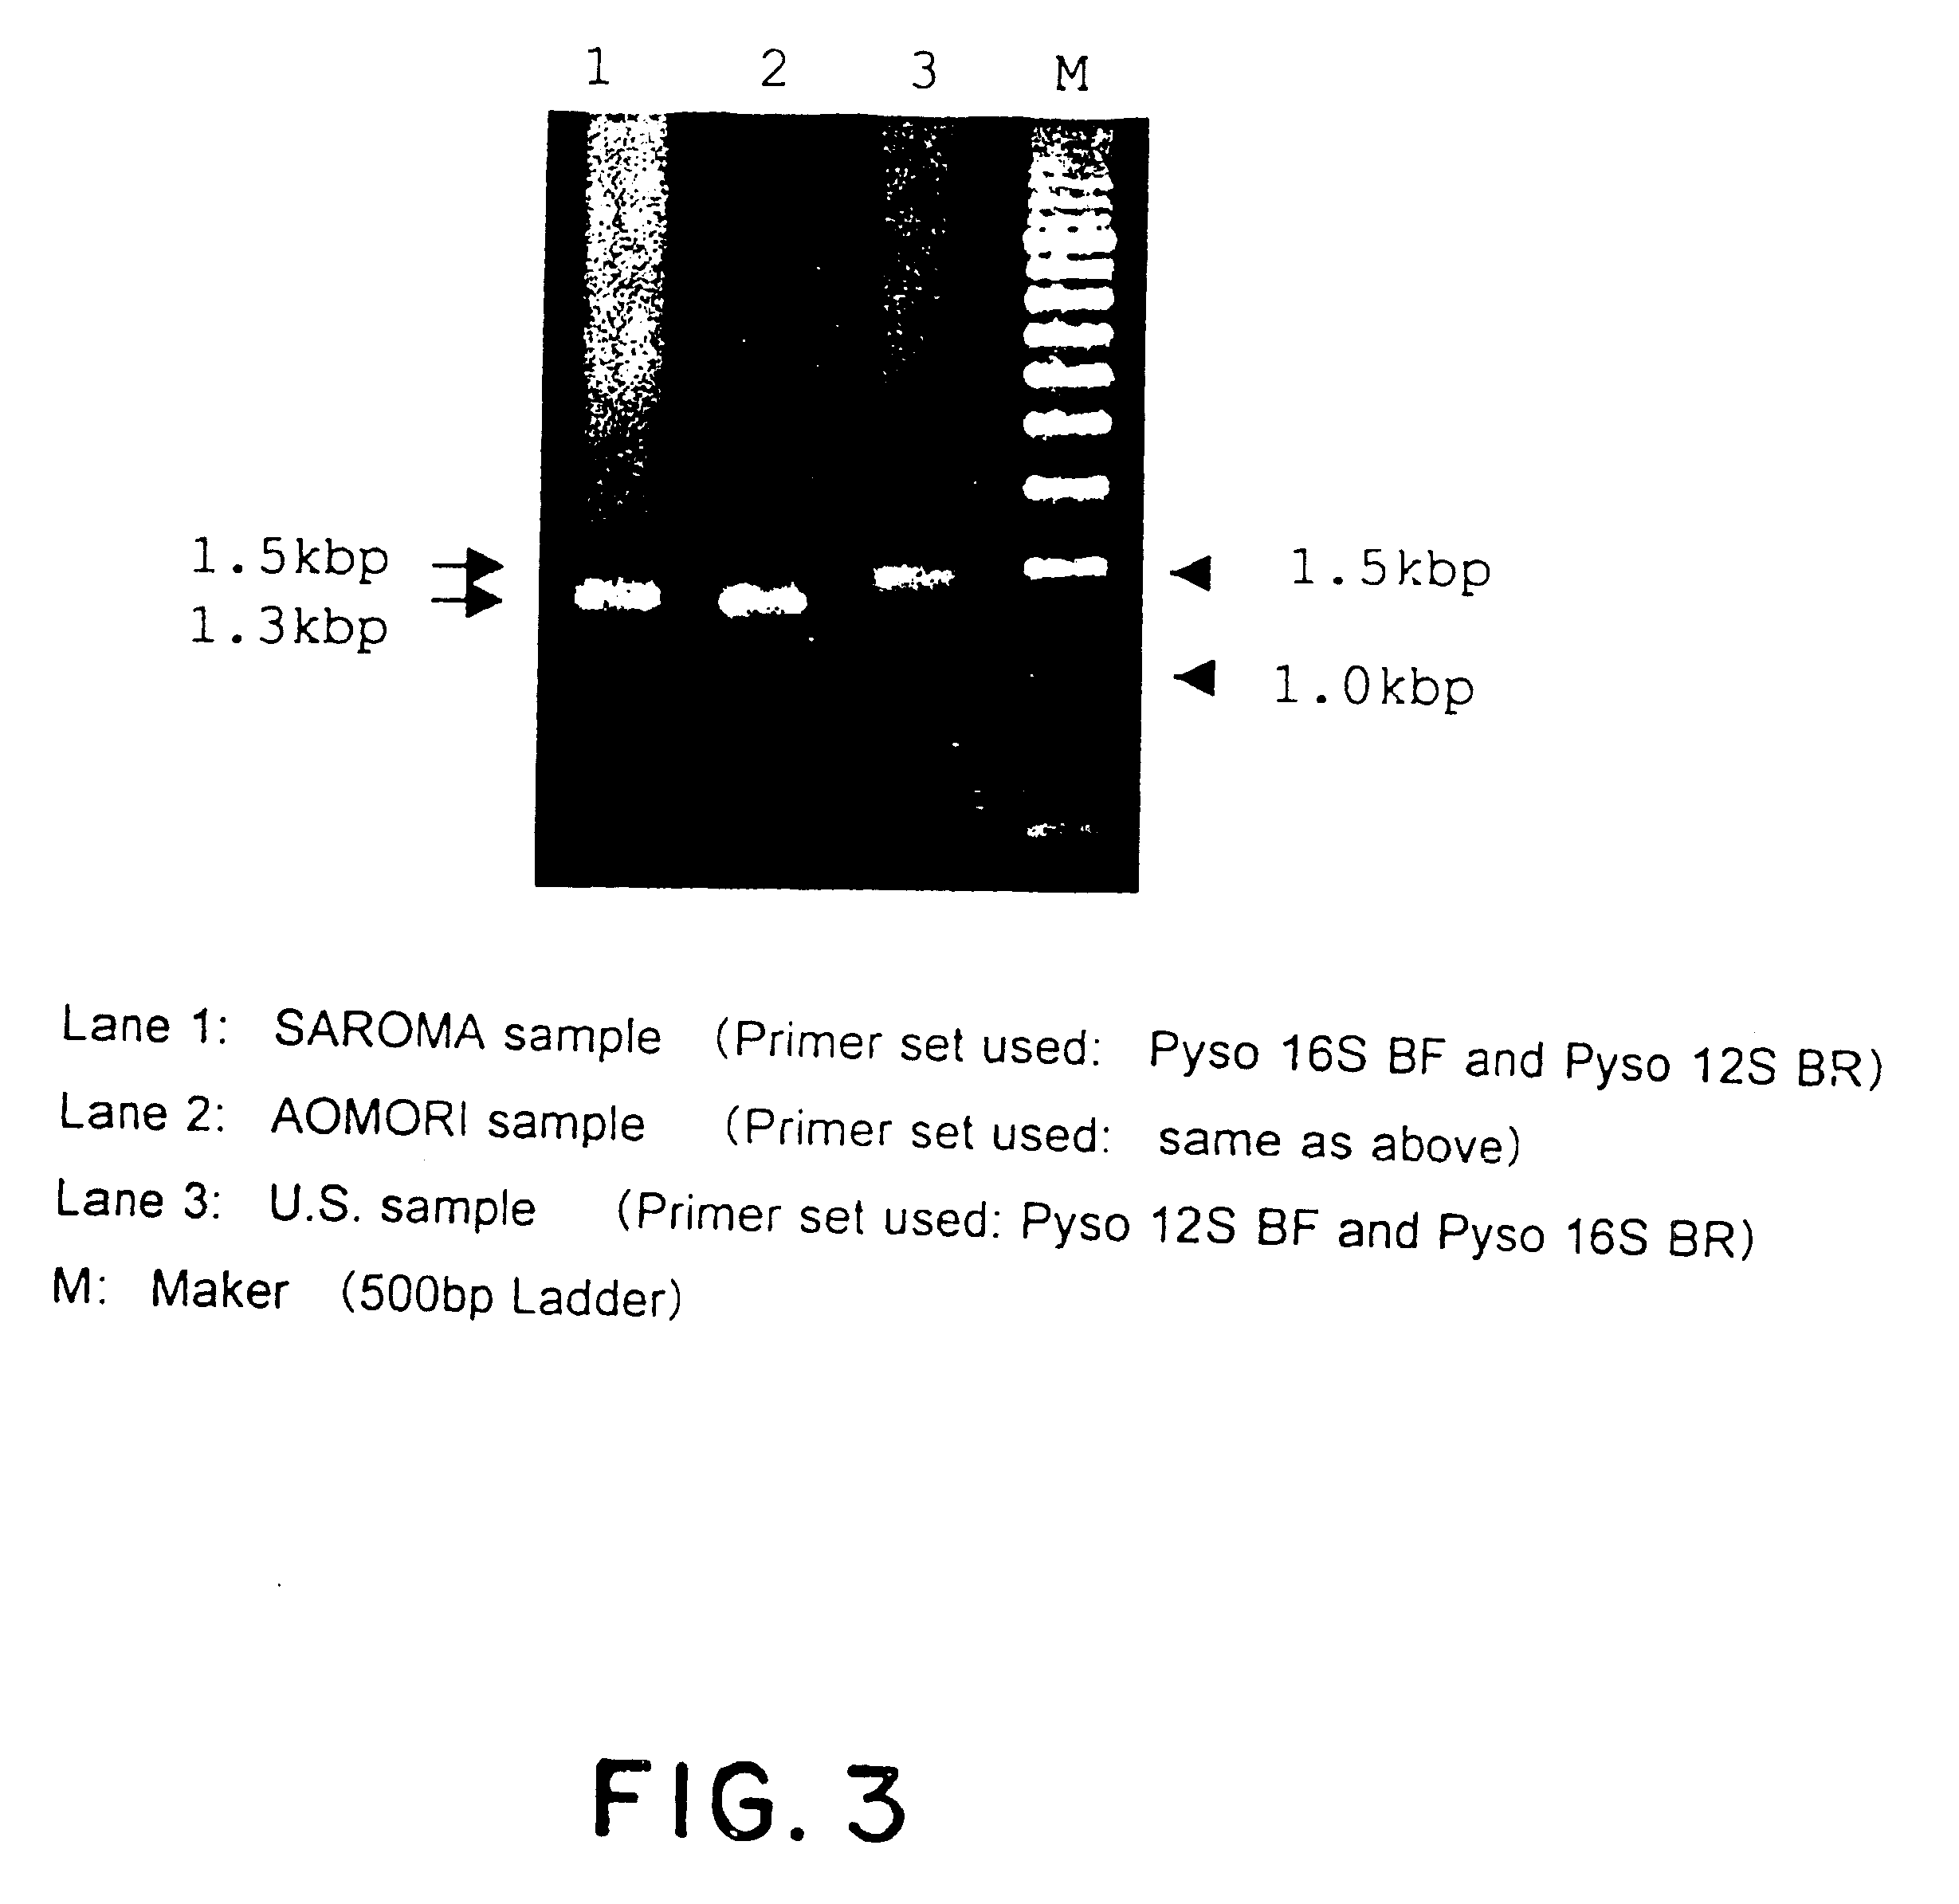 Method for analyzing phyletic lineage of scallop